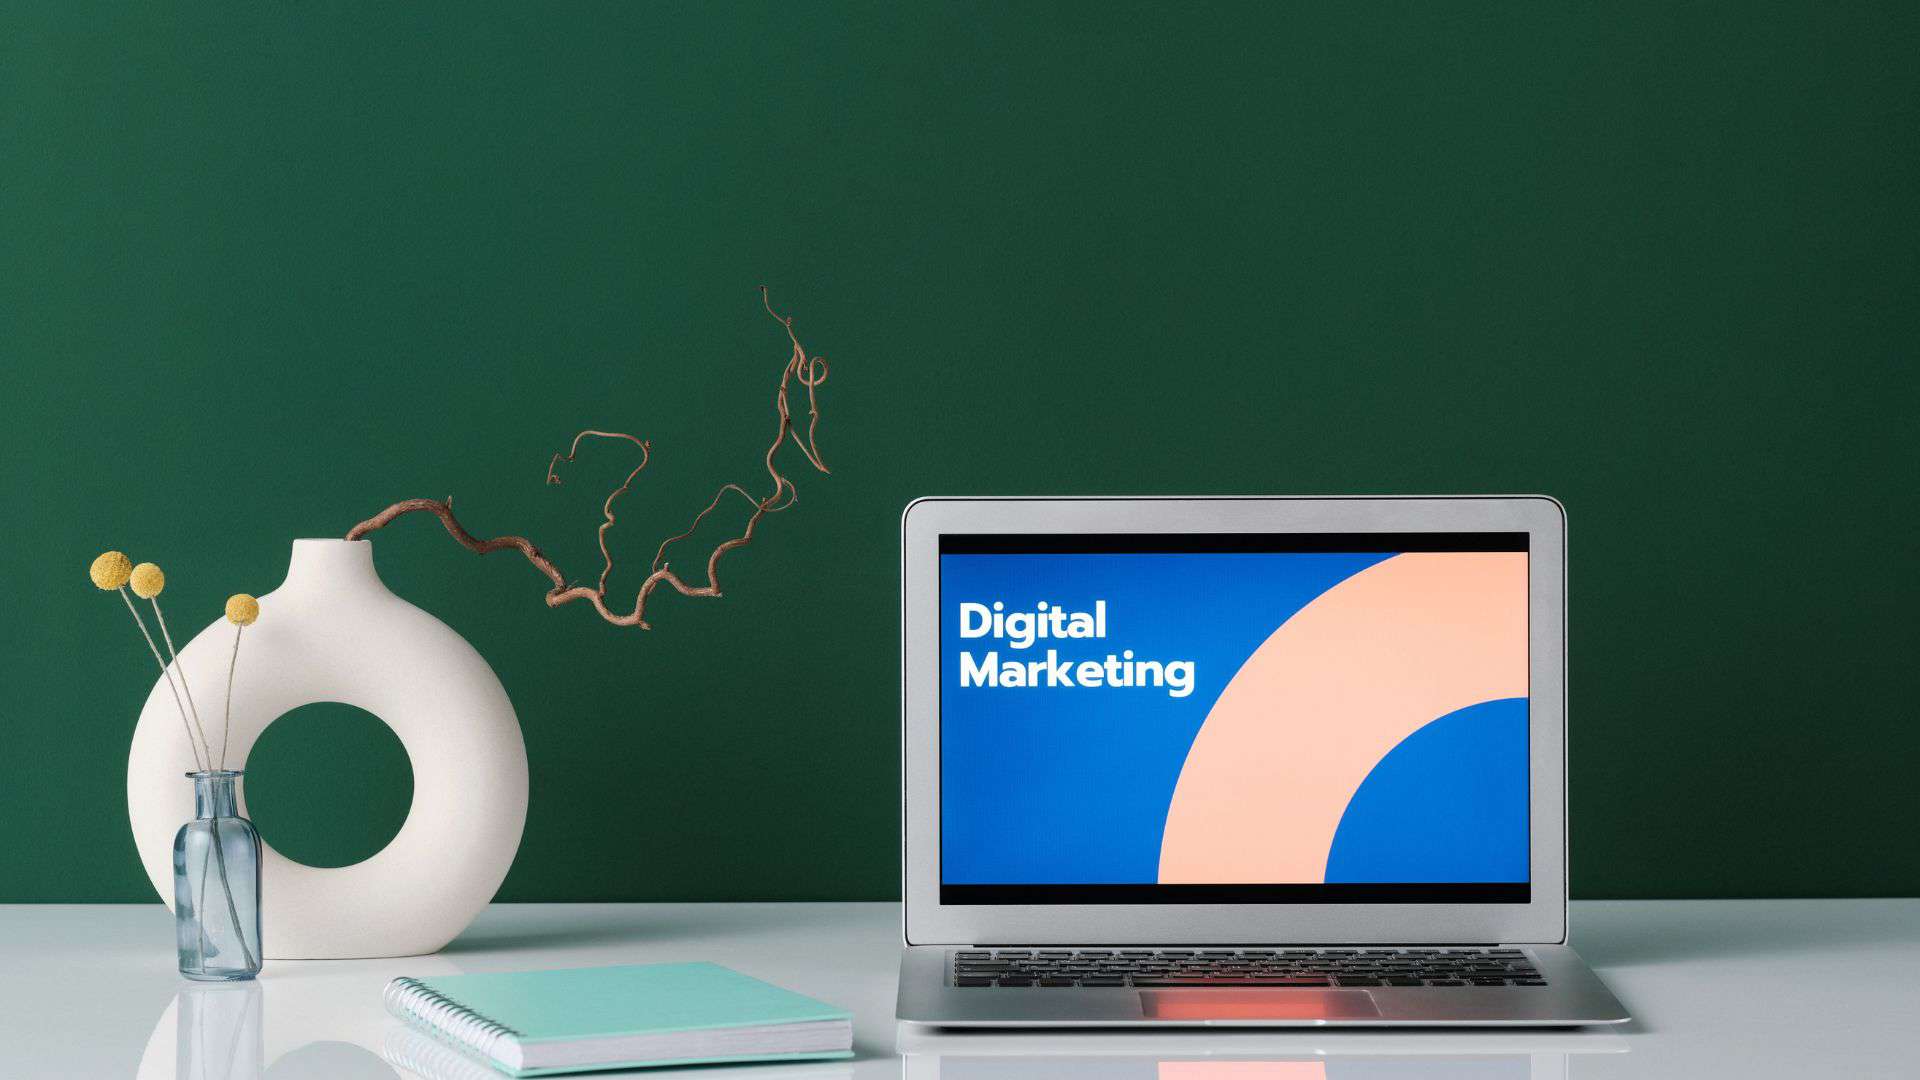 Why-Digital-Marketing-Is-Important-When-Selling-Online.jpg